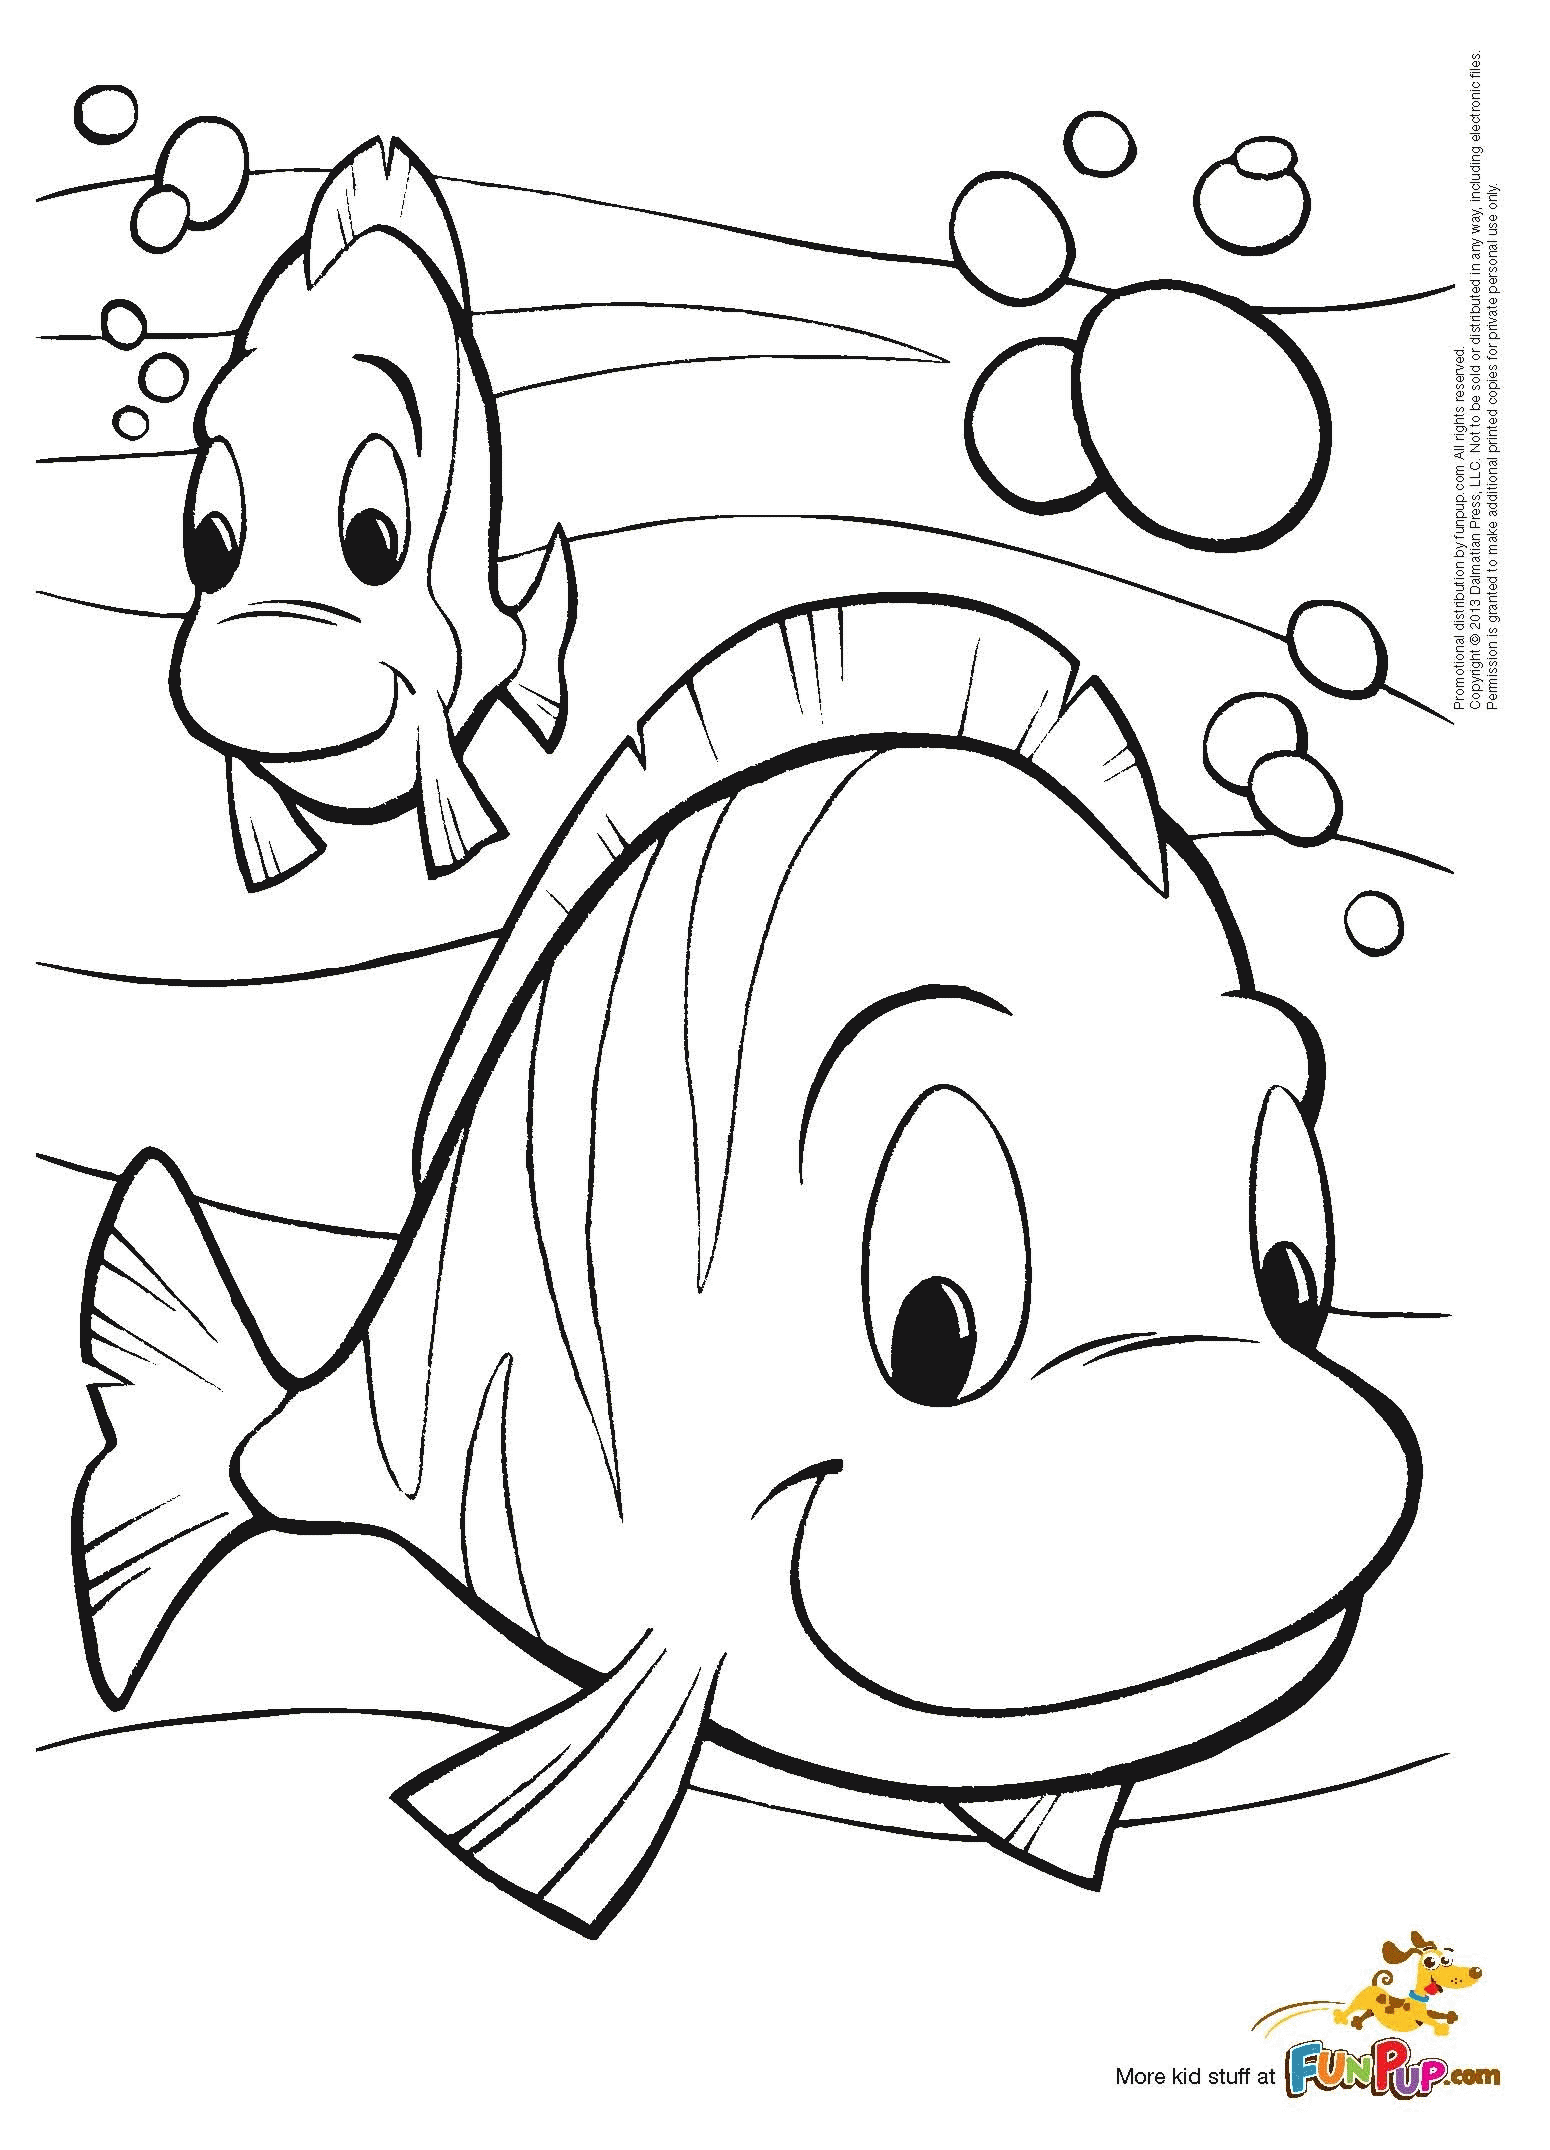 Hueyphotos3: June Coloring Pages